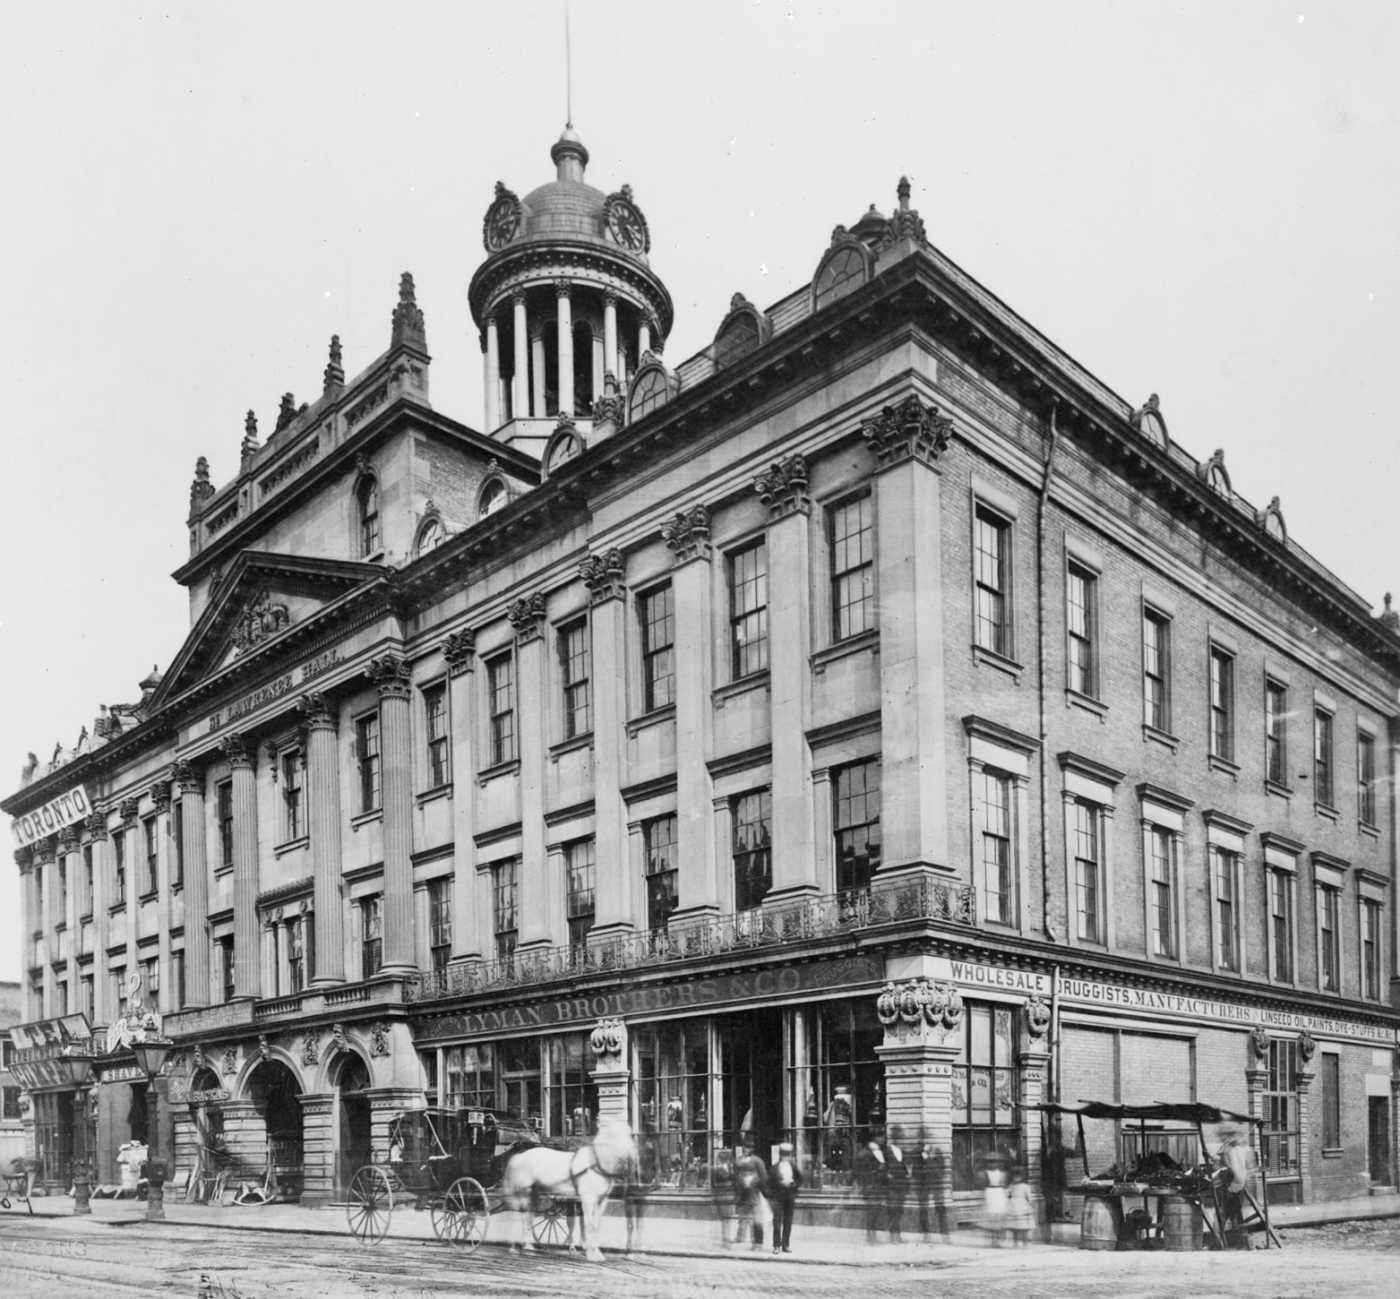 An archival photo shows St. Lawrence hall, a three story high large building with many windows and intricate stone detailing. A horse and buggy can see seen in front of the building along with the store front names "Lyman Brothers & Co, Druggists" as well as "Wholesale Druggists, Manufacturers, Linseed Oil, Paints, Dye-Stuffs".